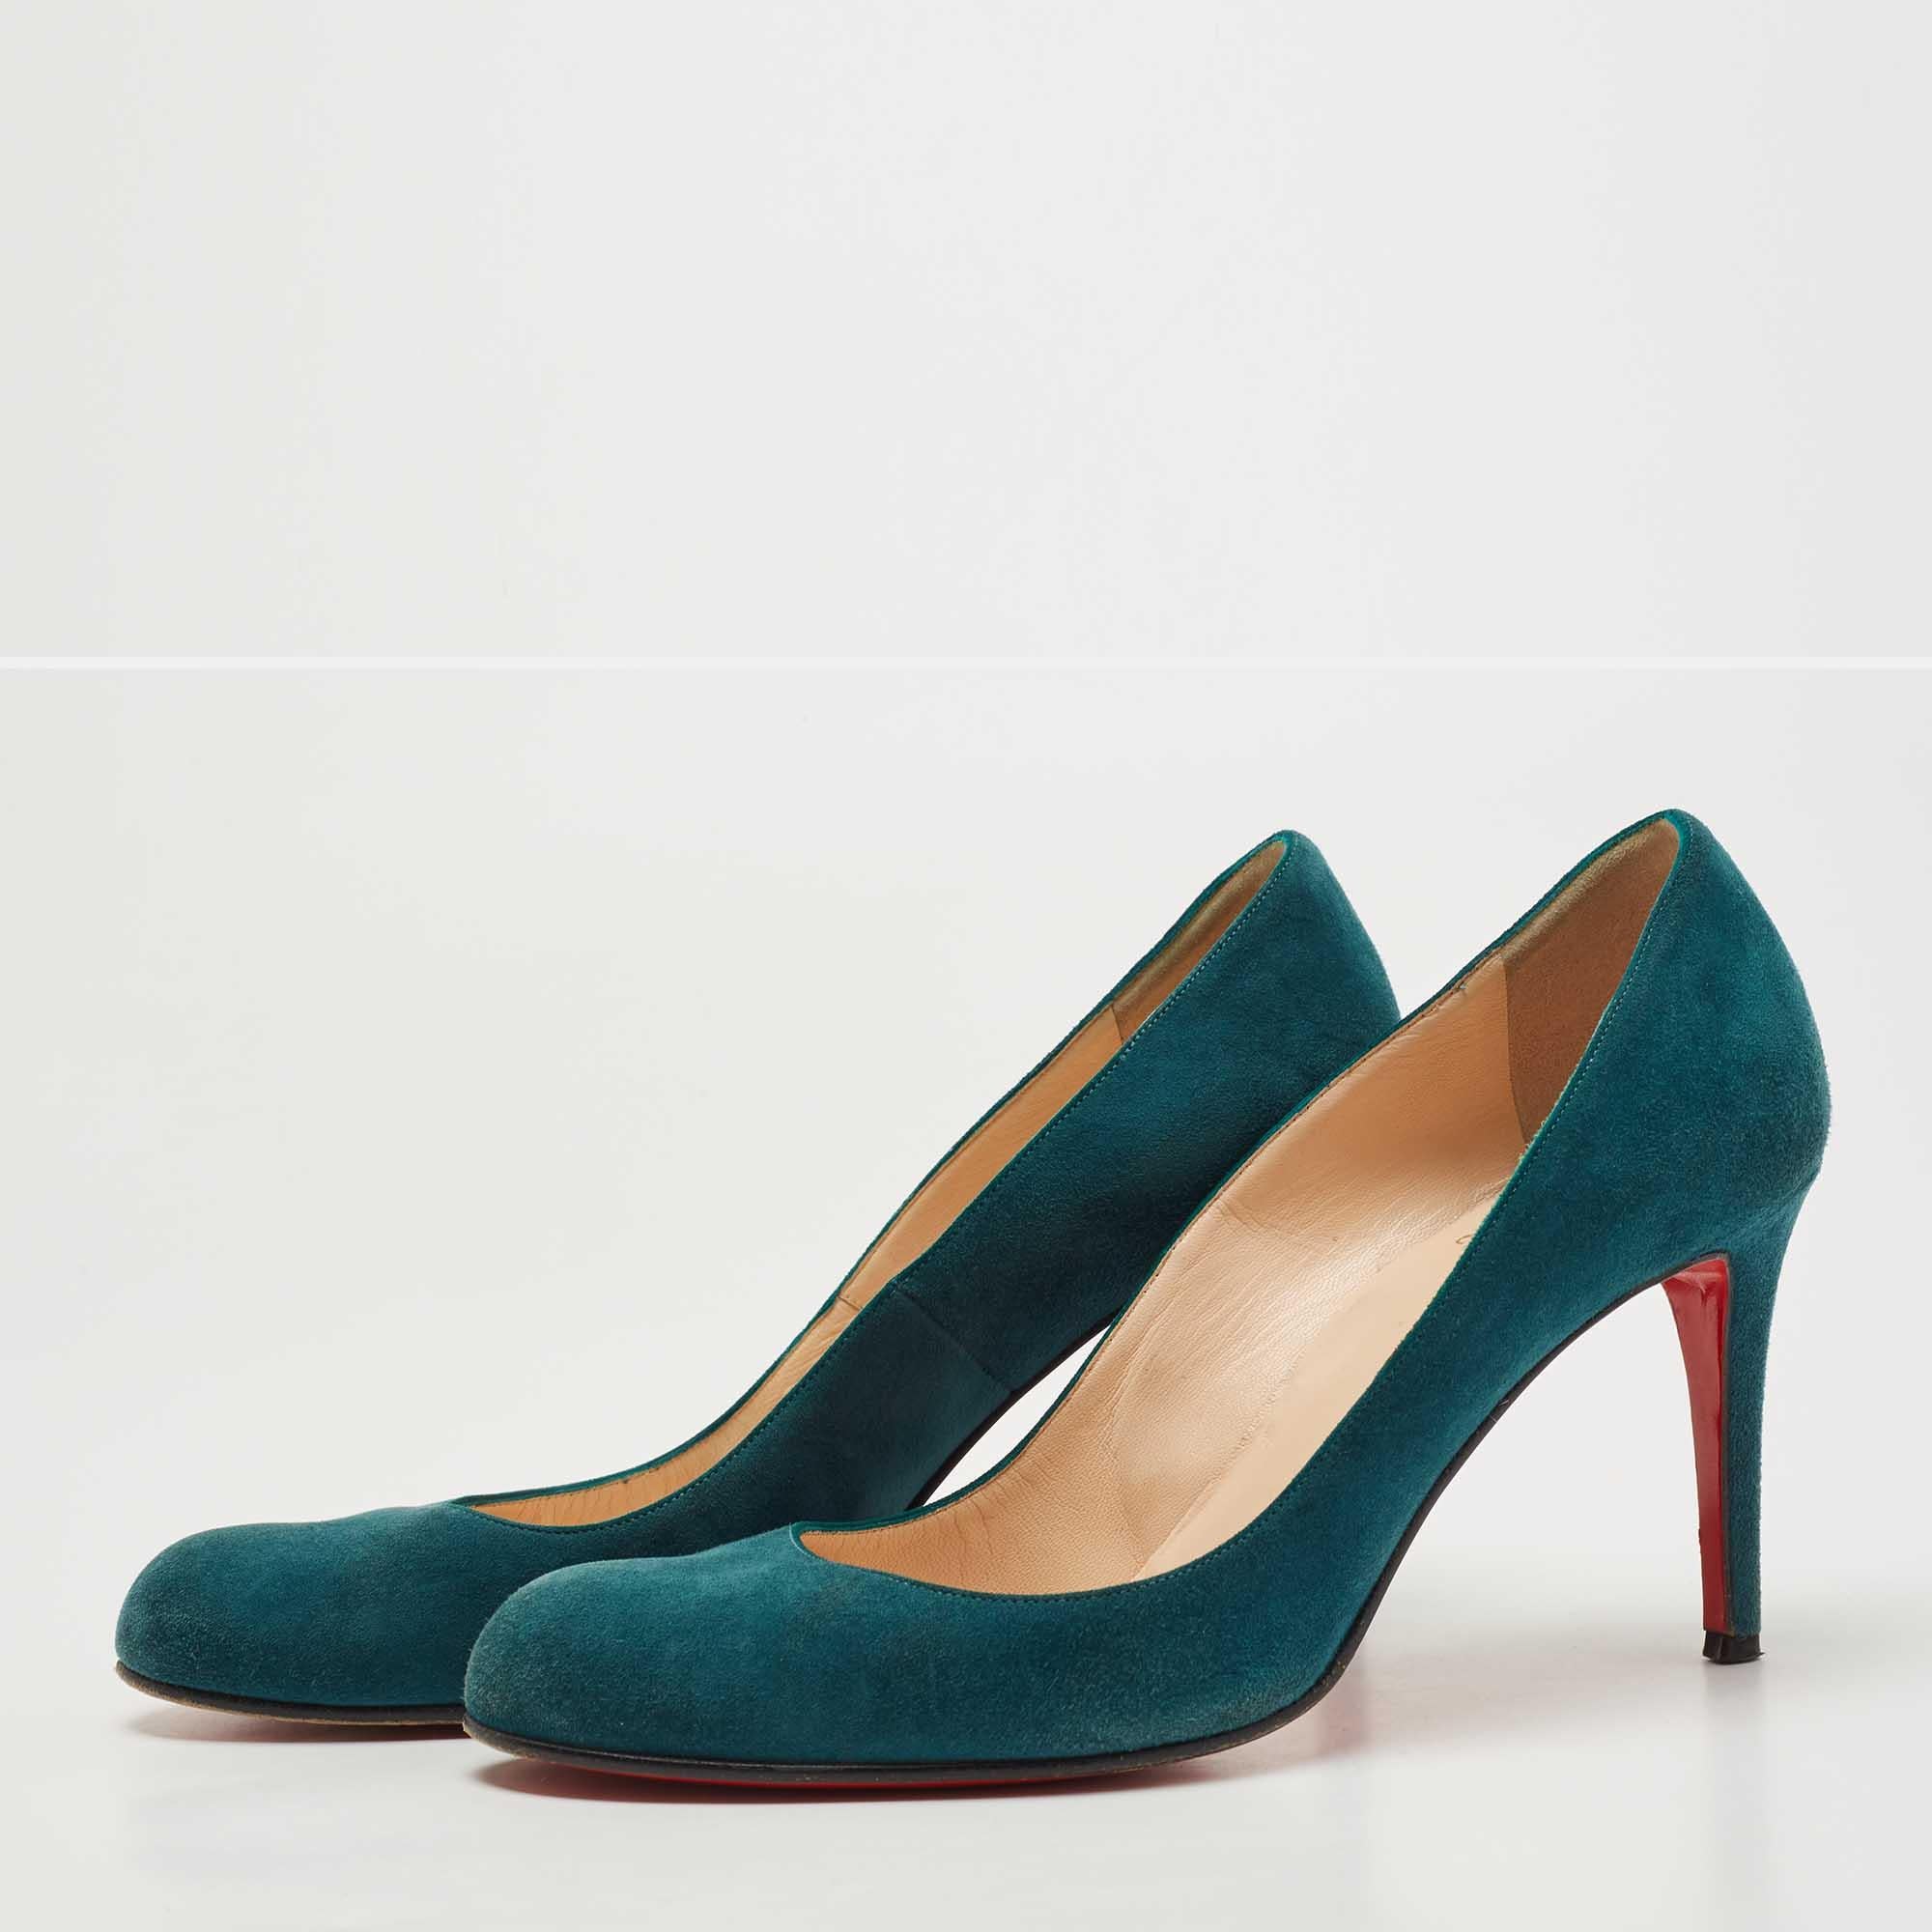 Christian Louboutin Teal Suede Simple Pumps Size 40.5 4